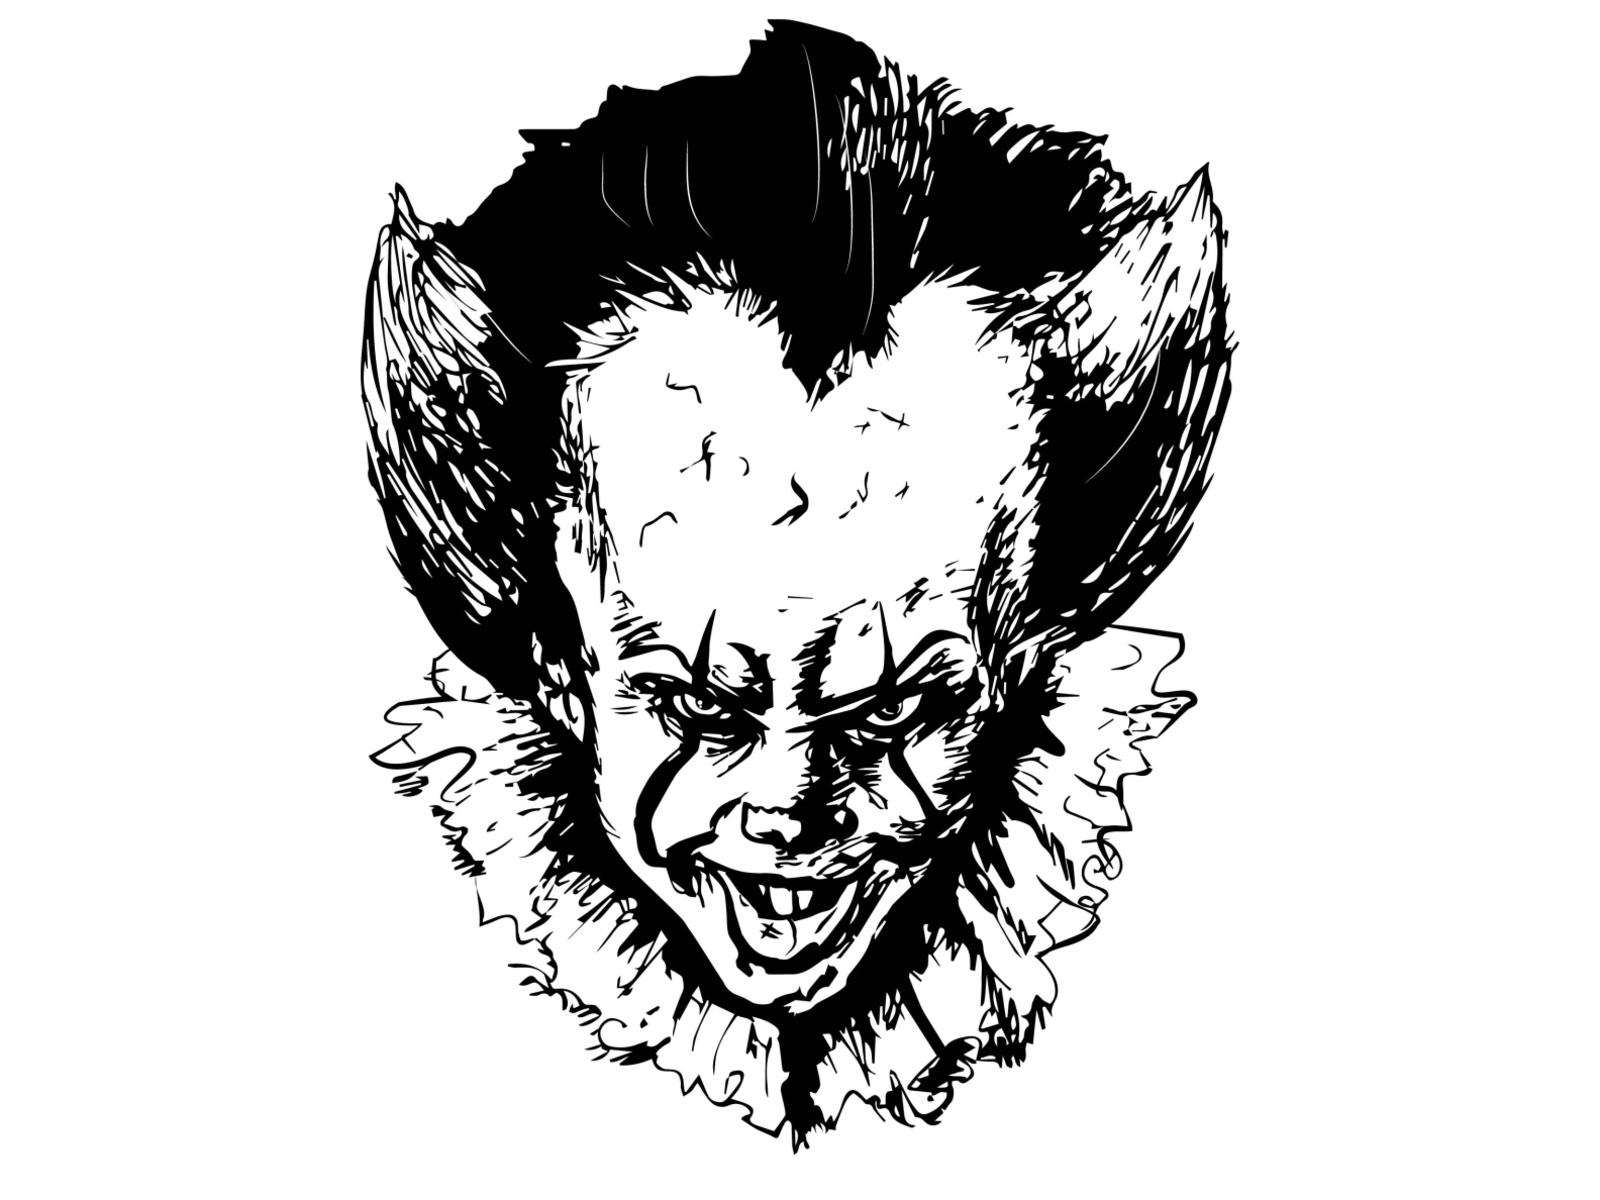 Pennywise the Dancing Clown by Ivan Ramirez on Dribbble